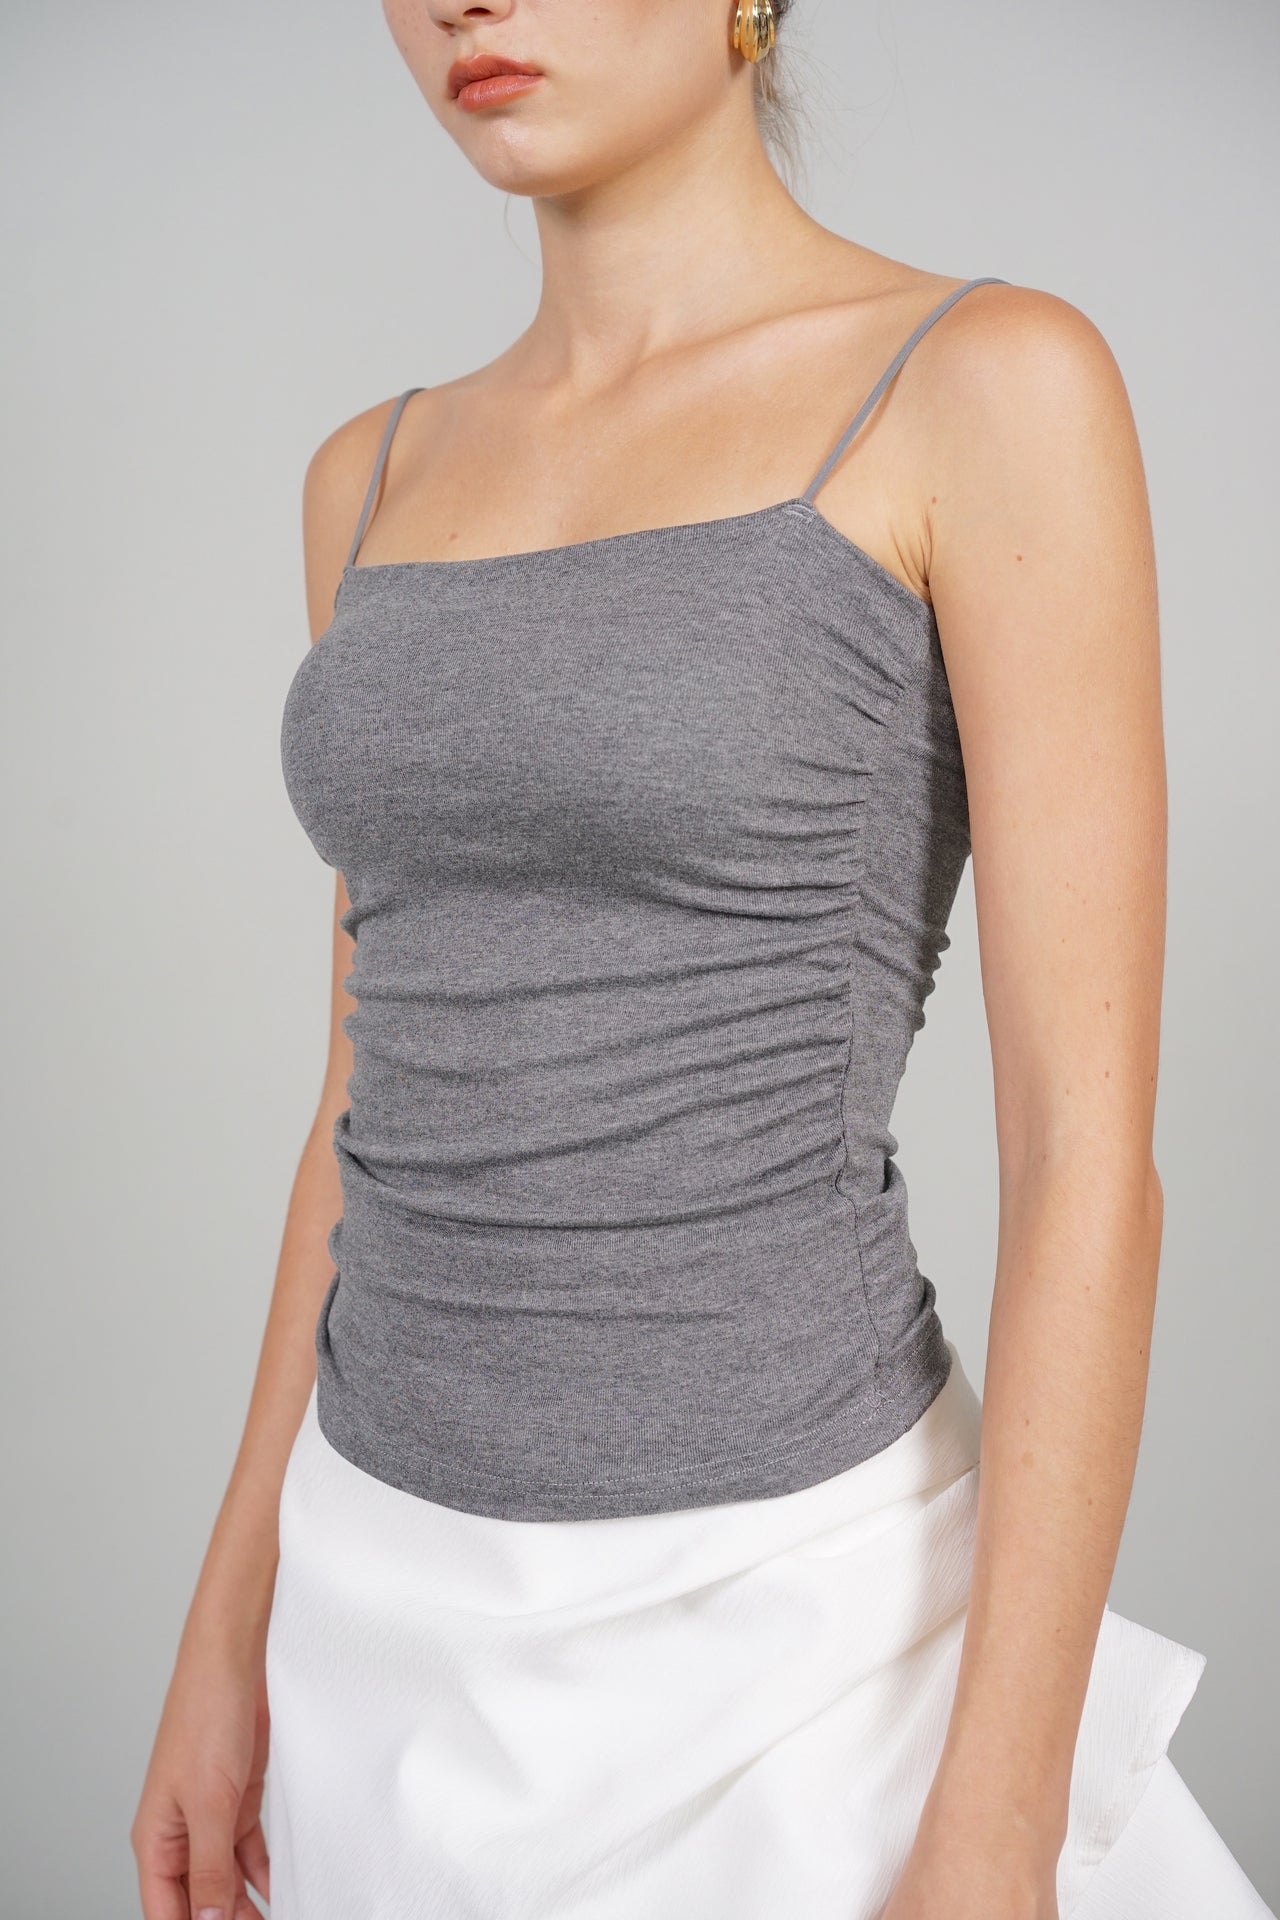 EVERYDAY / Reese Cami Top in Grey